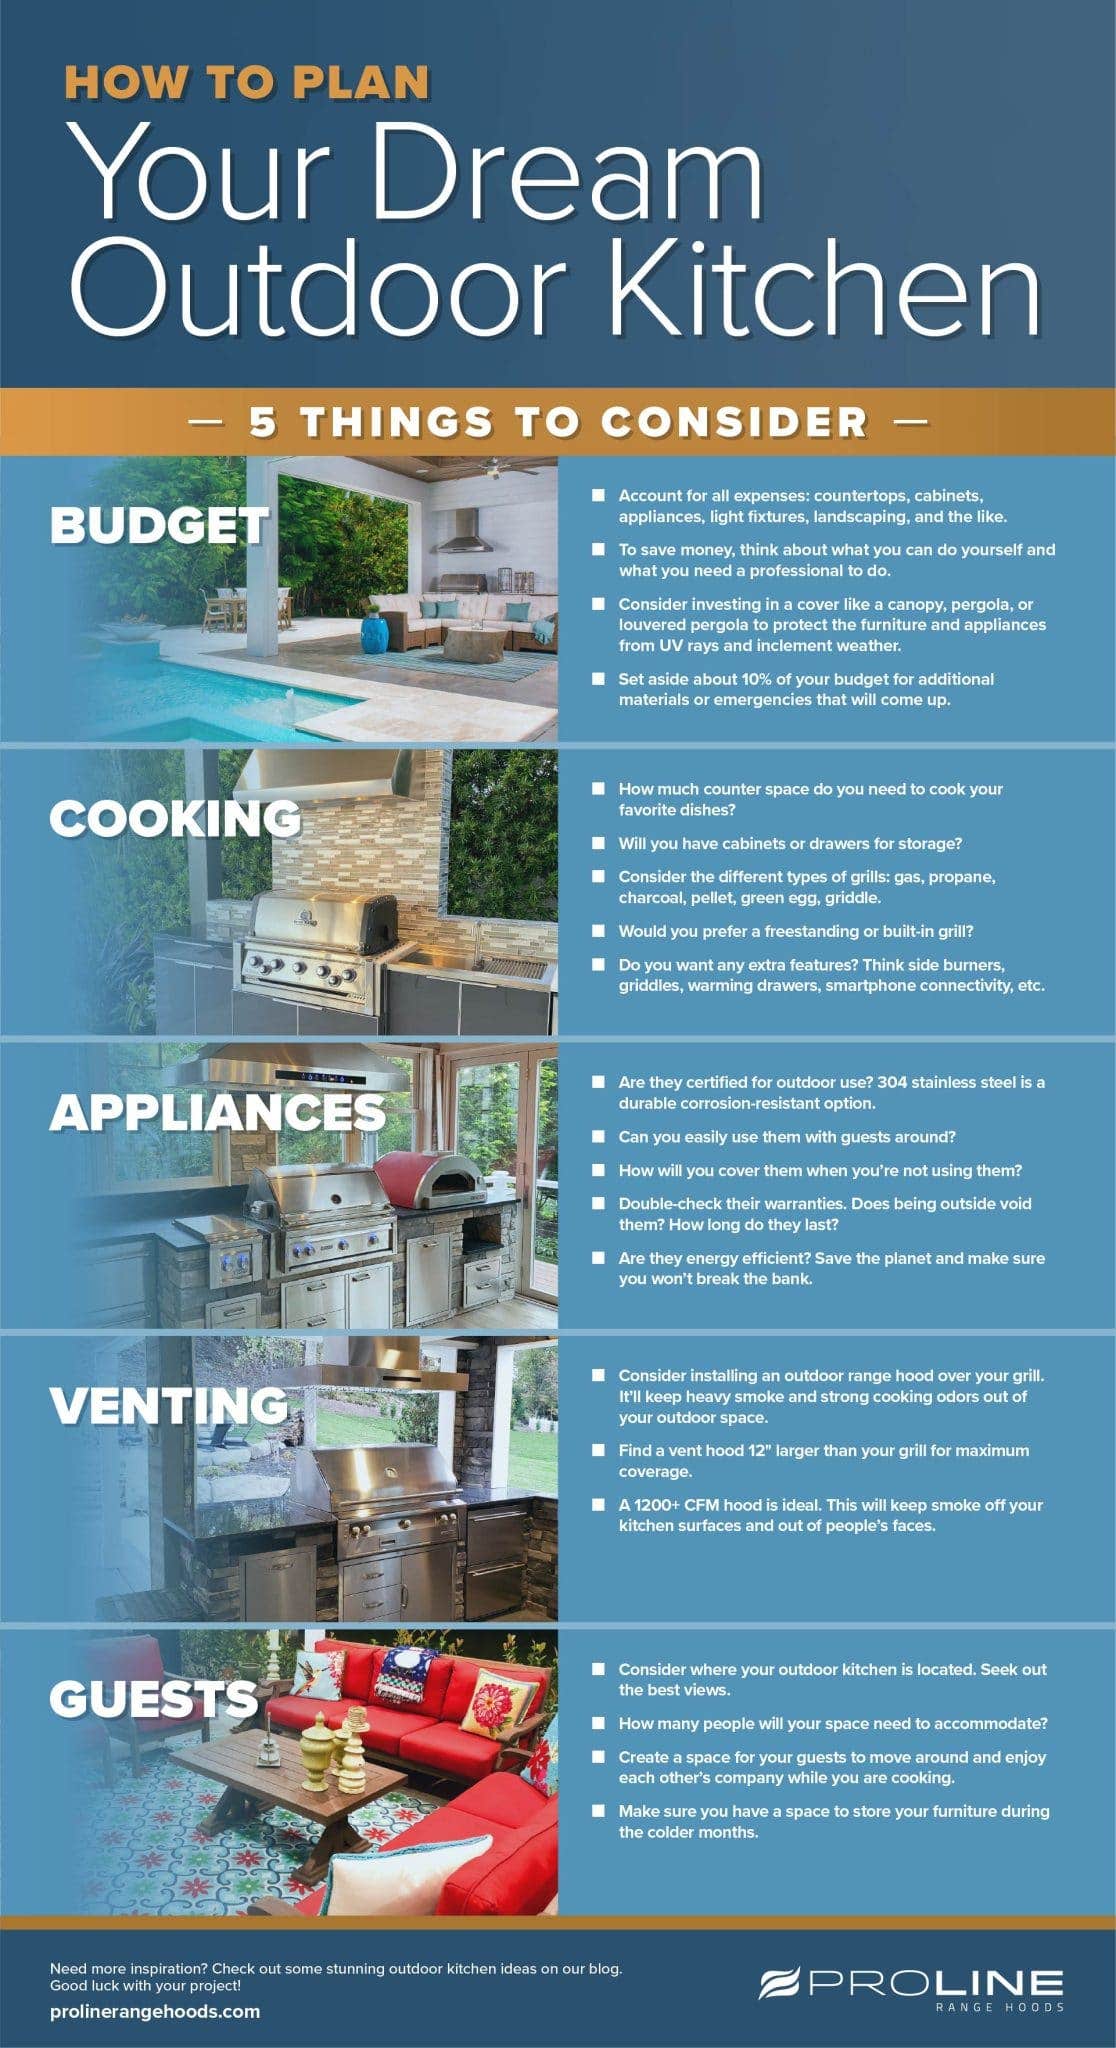 How to Plan Your Dream Outdoor Kitchen - Infographic